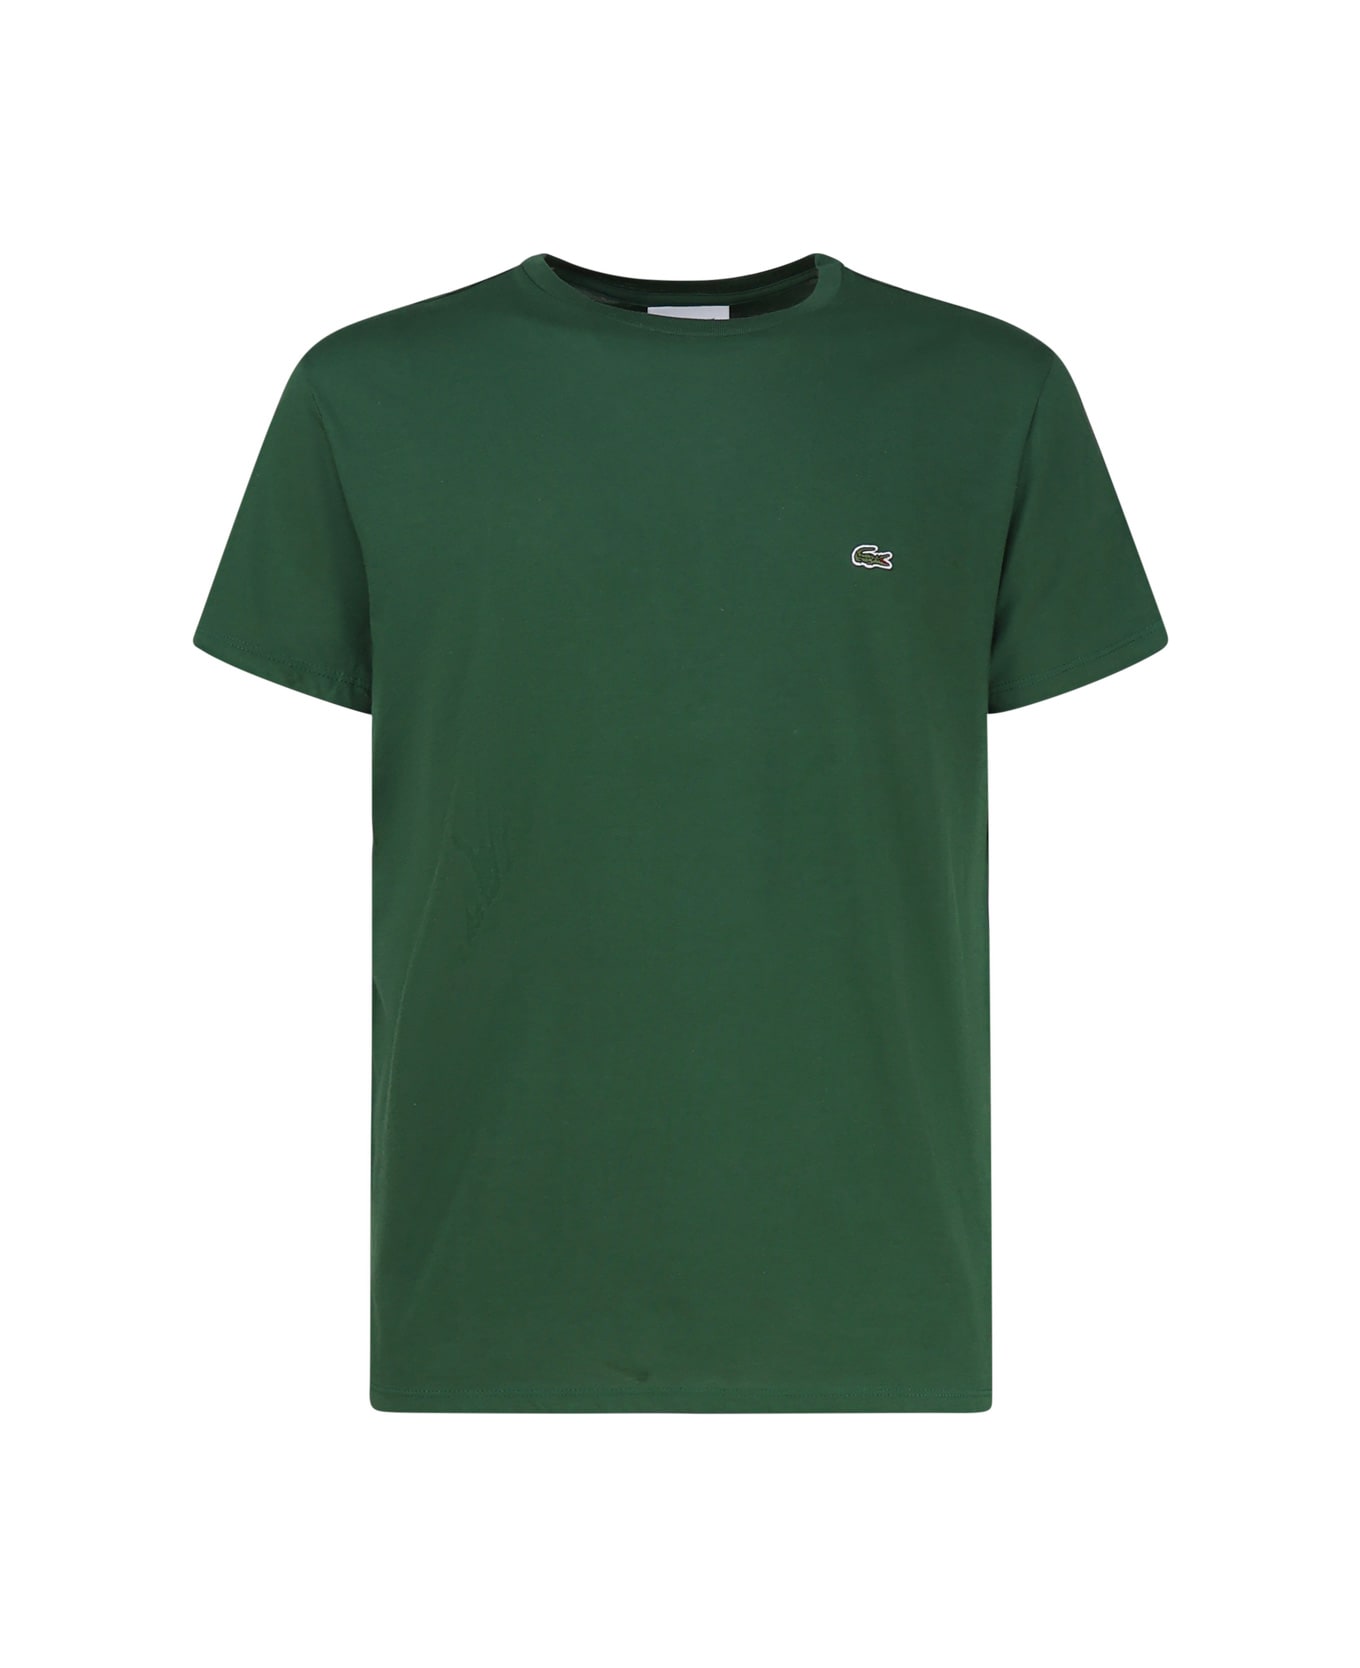 Lacoste Green T-shirt In Cotton Jersey Lacoste